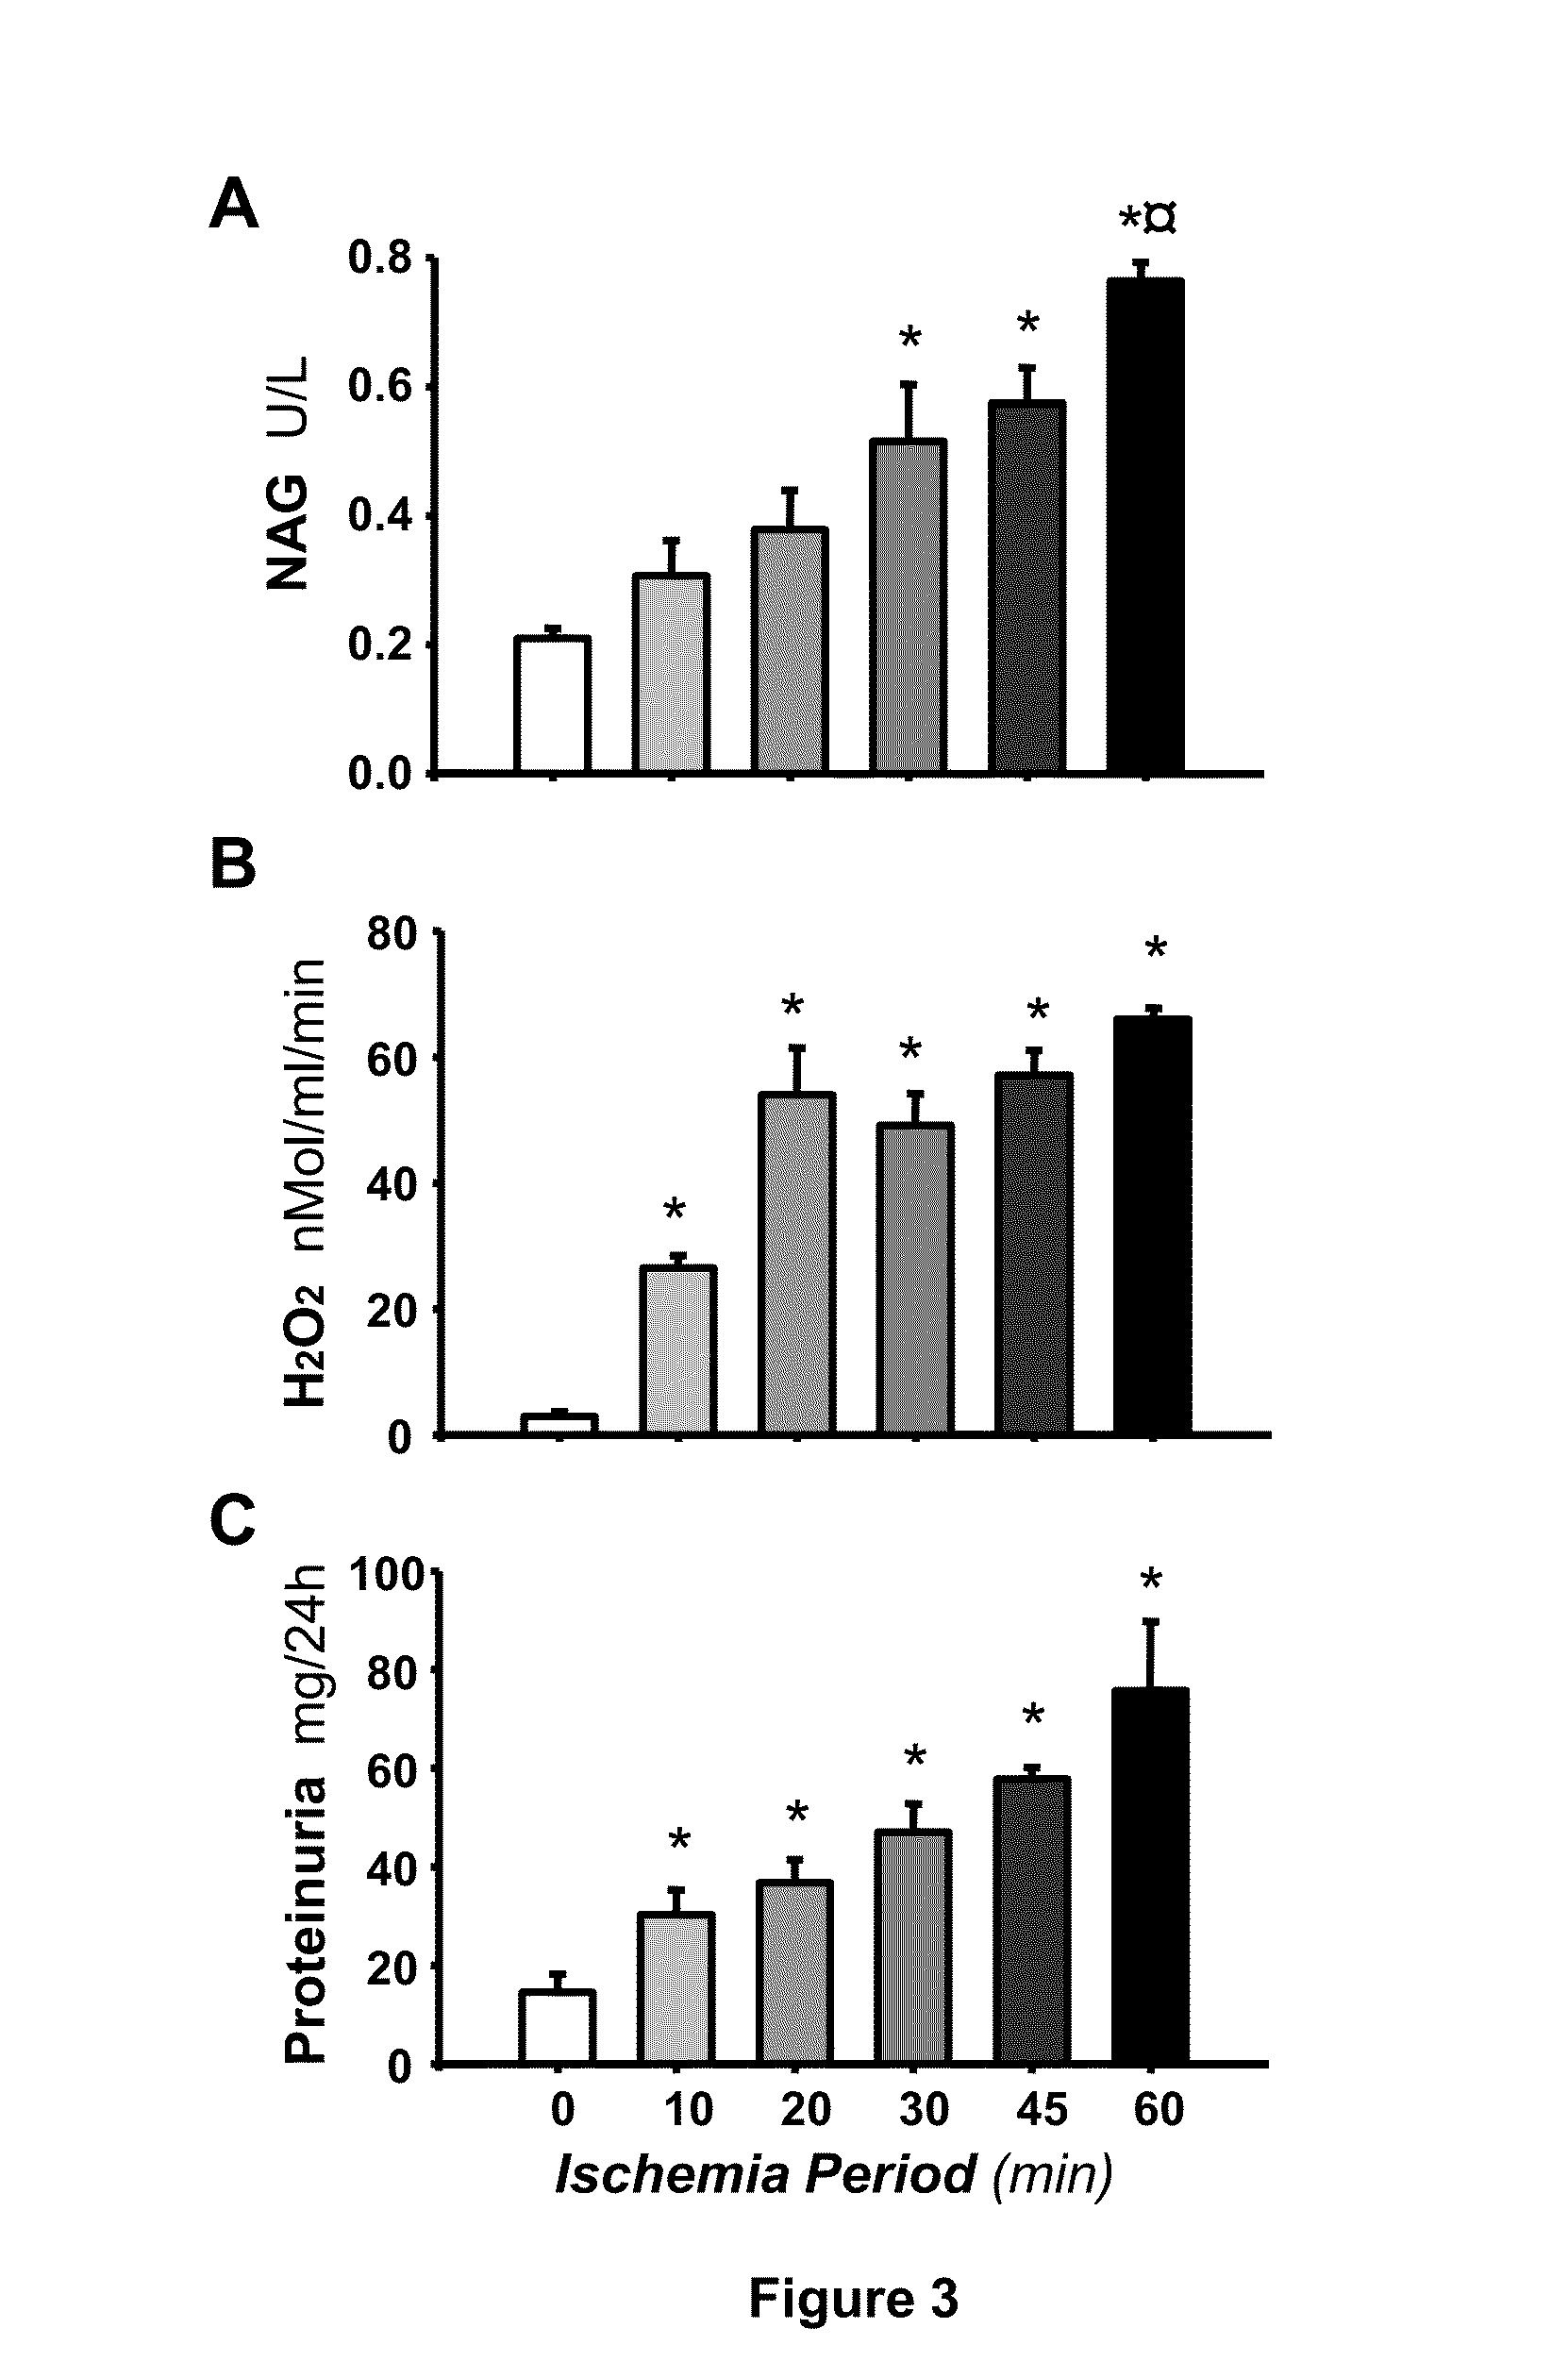 Diagnostic method for detecting acute kidney injury using heat shock protein 72 as a sensitive biomarker